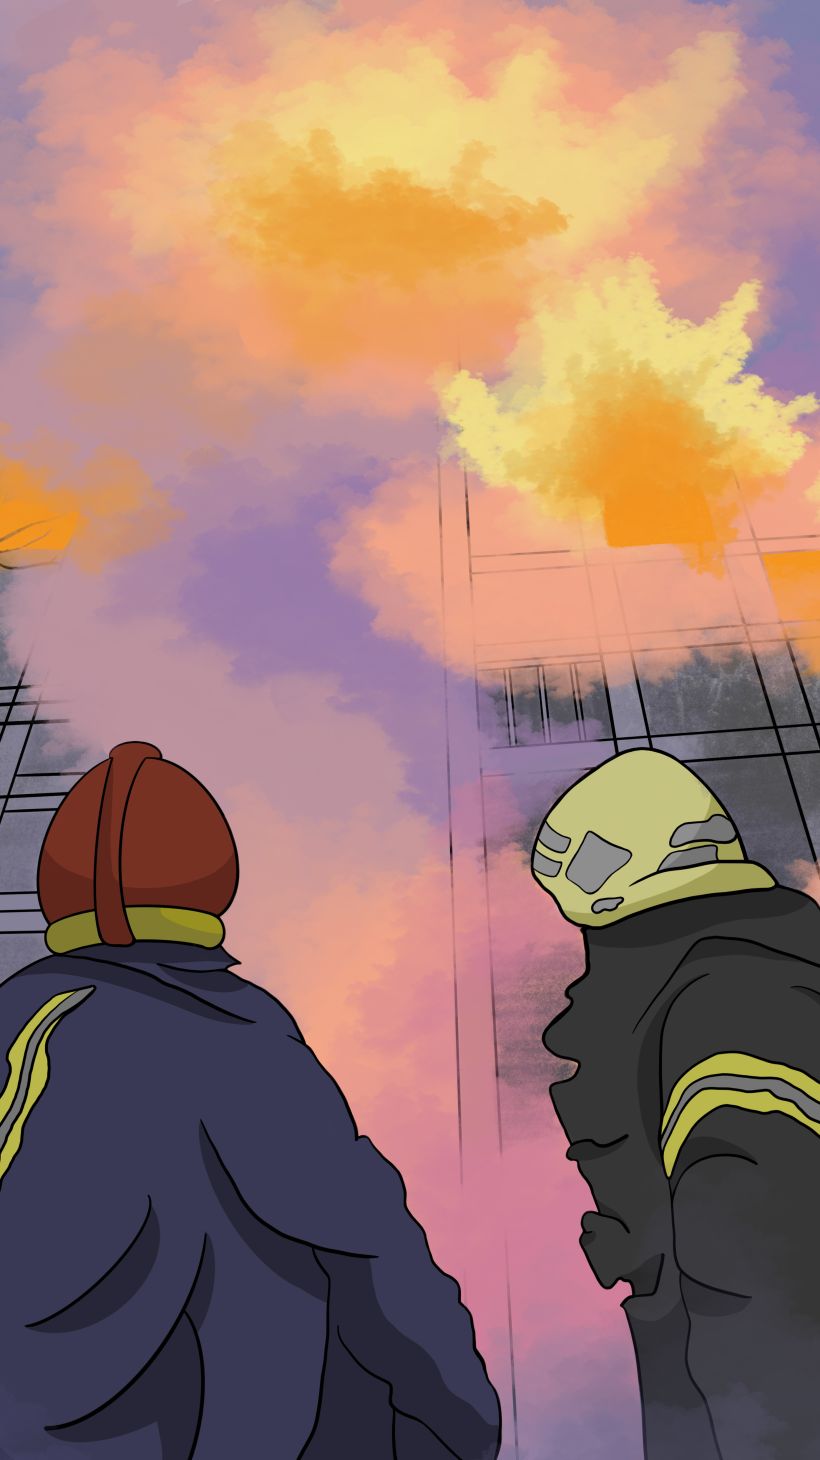 An illustration of a building on fire with two officers in front.